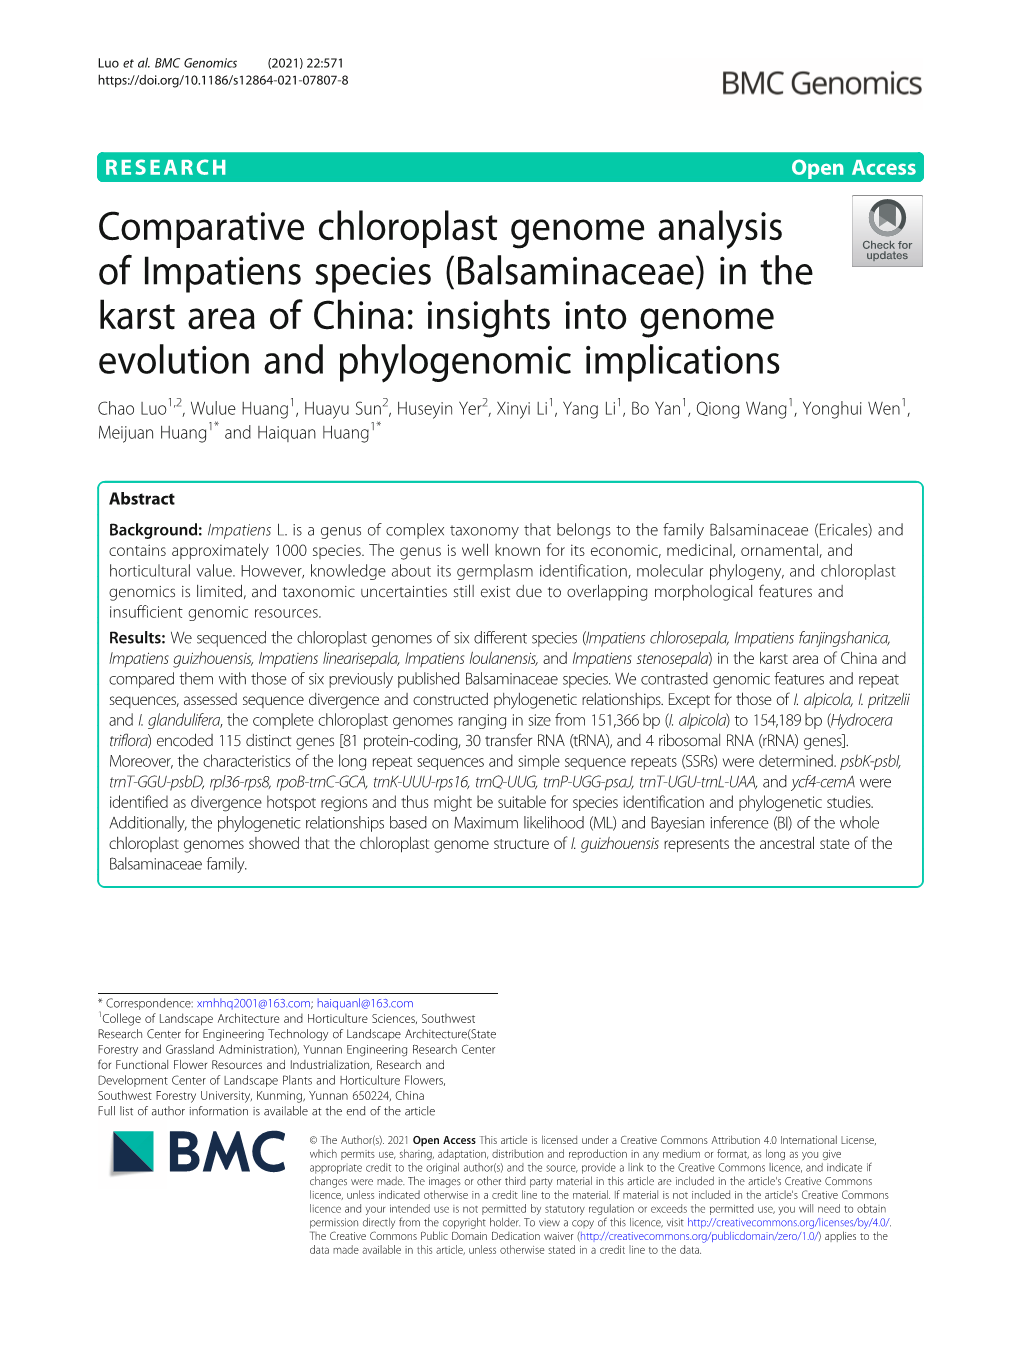 Comparative Chloroplast Genome Analysis Of